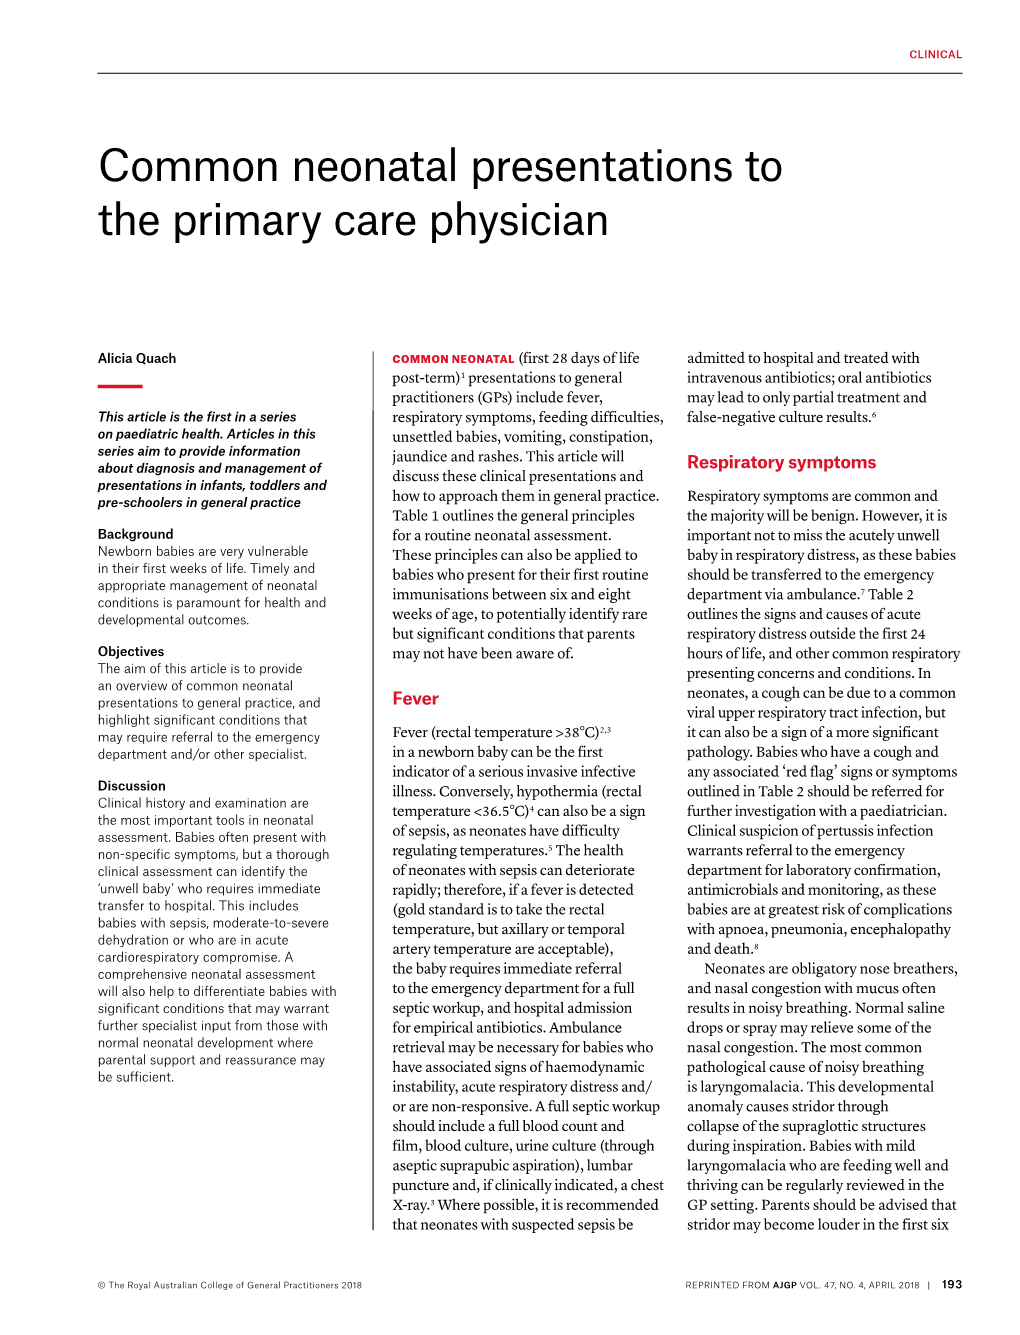 Common Neonatal Presentations to the Primary Care Physician